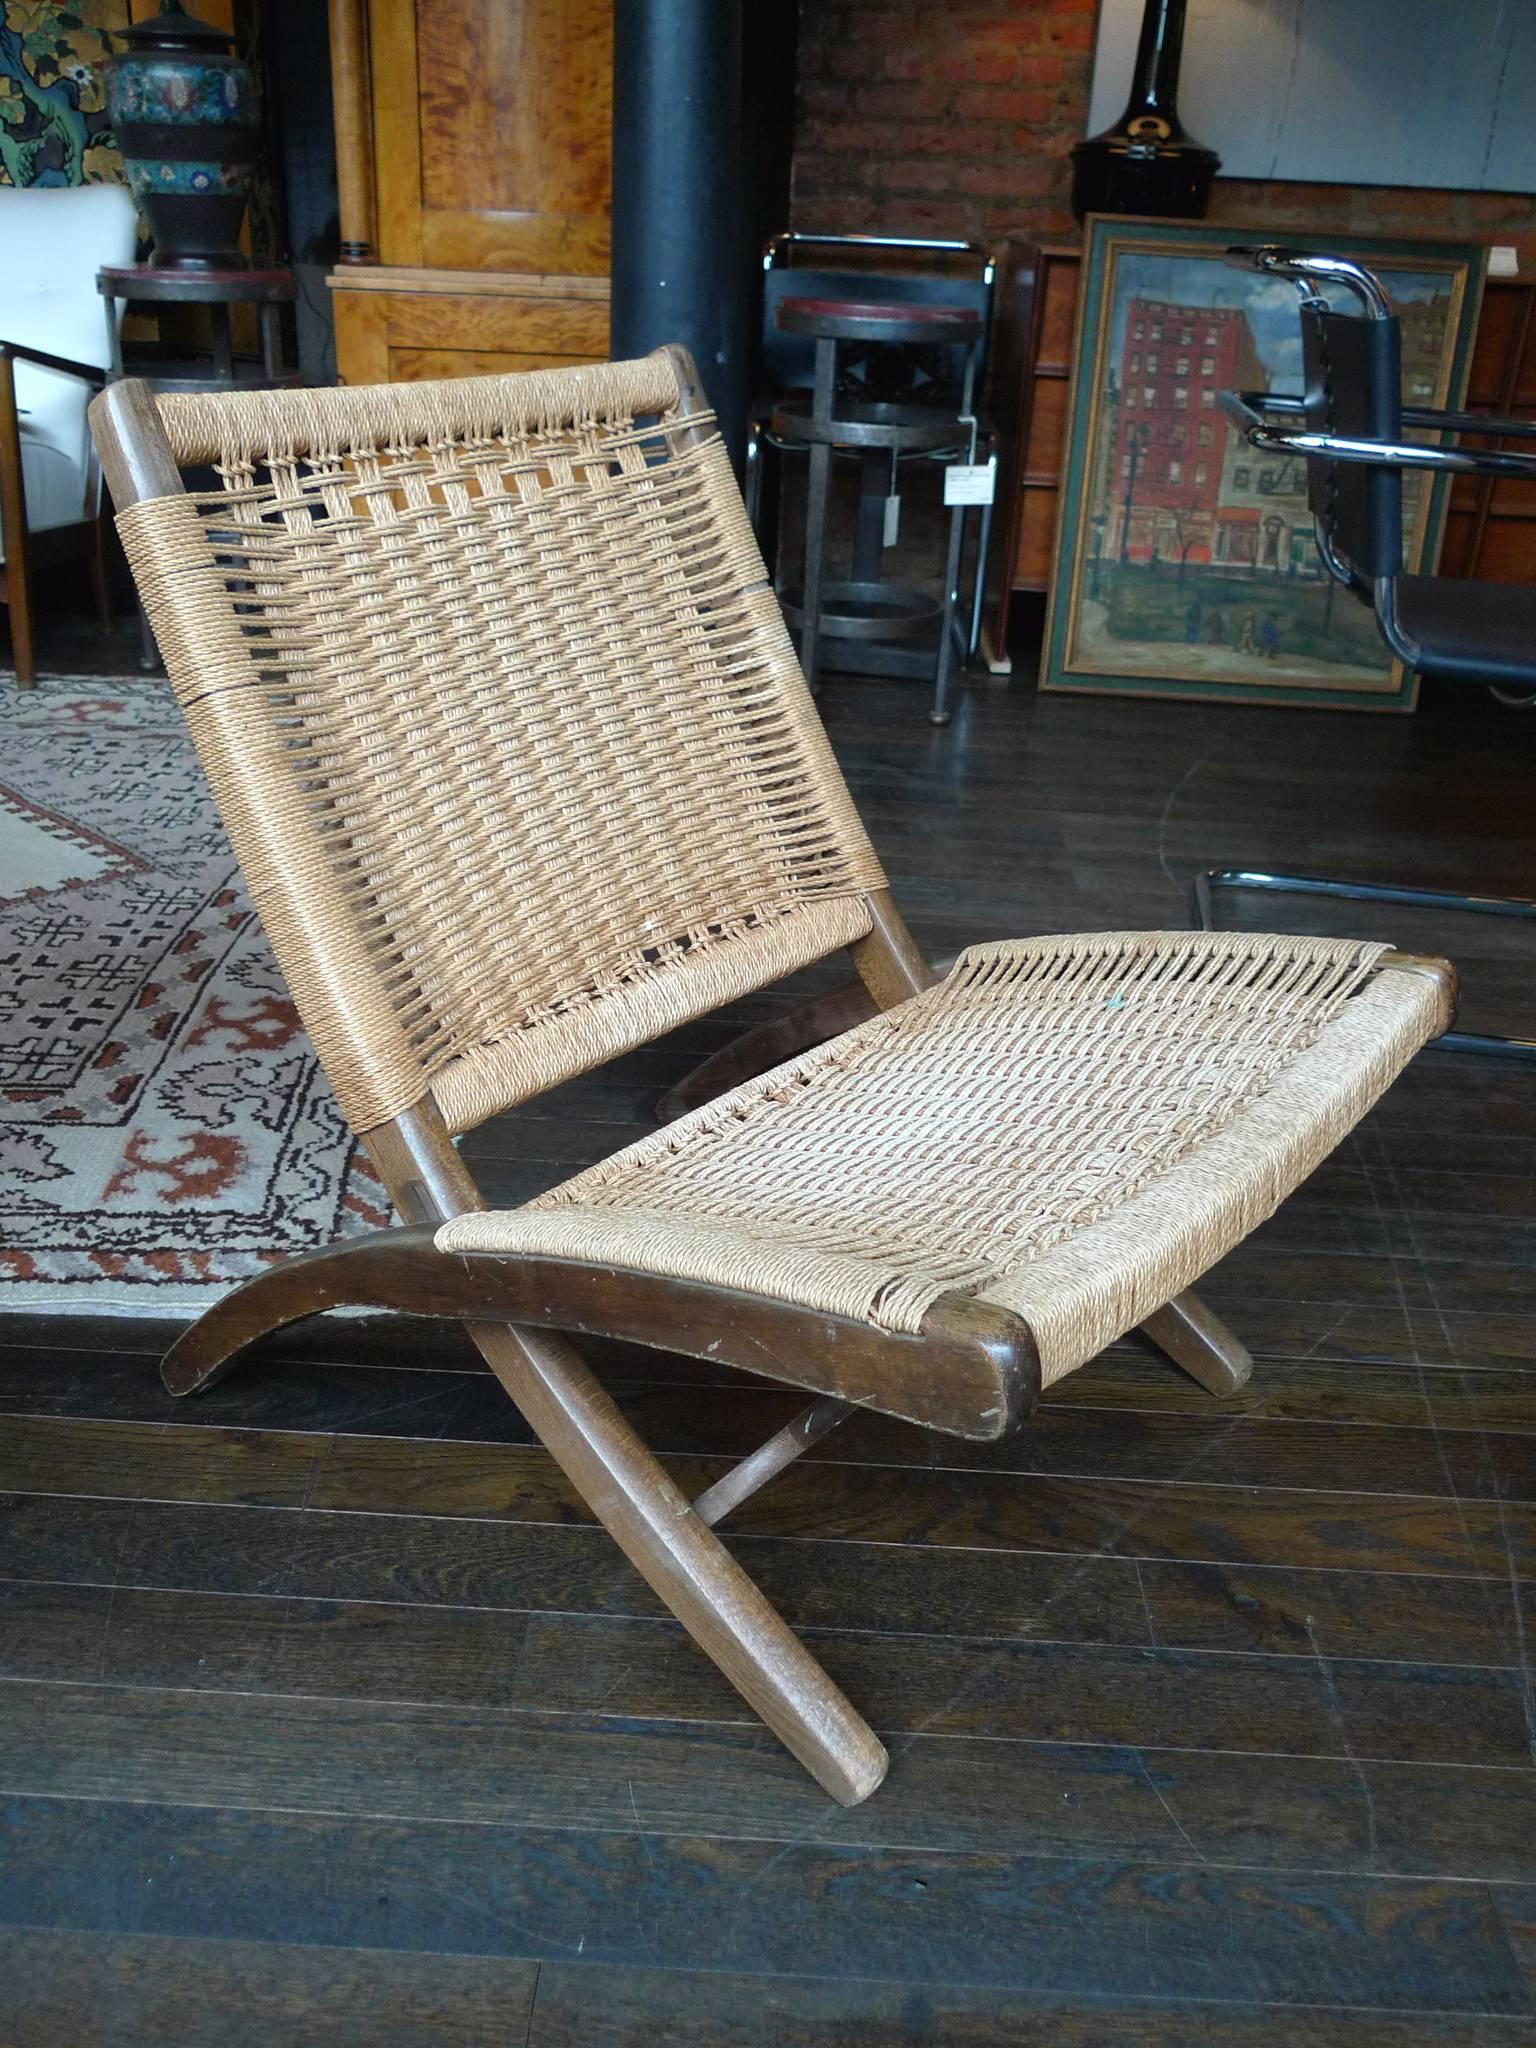 This Mid-Century Modern folding chair is in the style of Hans Wegner. Its dynamic design consists of a crisscrossing diagonal walnut frame. Sturdy rope is woven across the frame, creating the back and seat. The walnut has beautiful rounded edges.